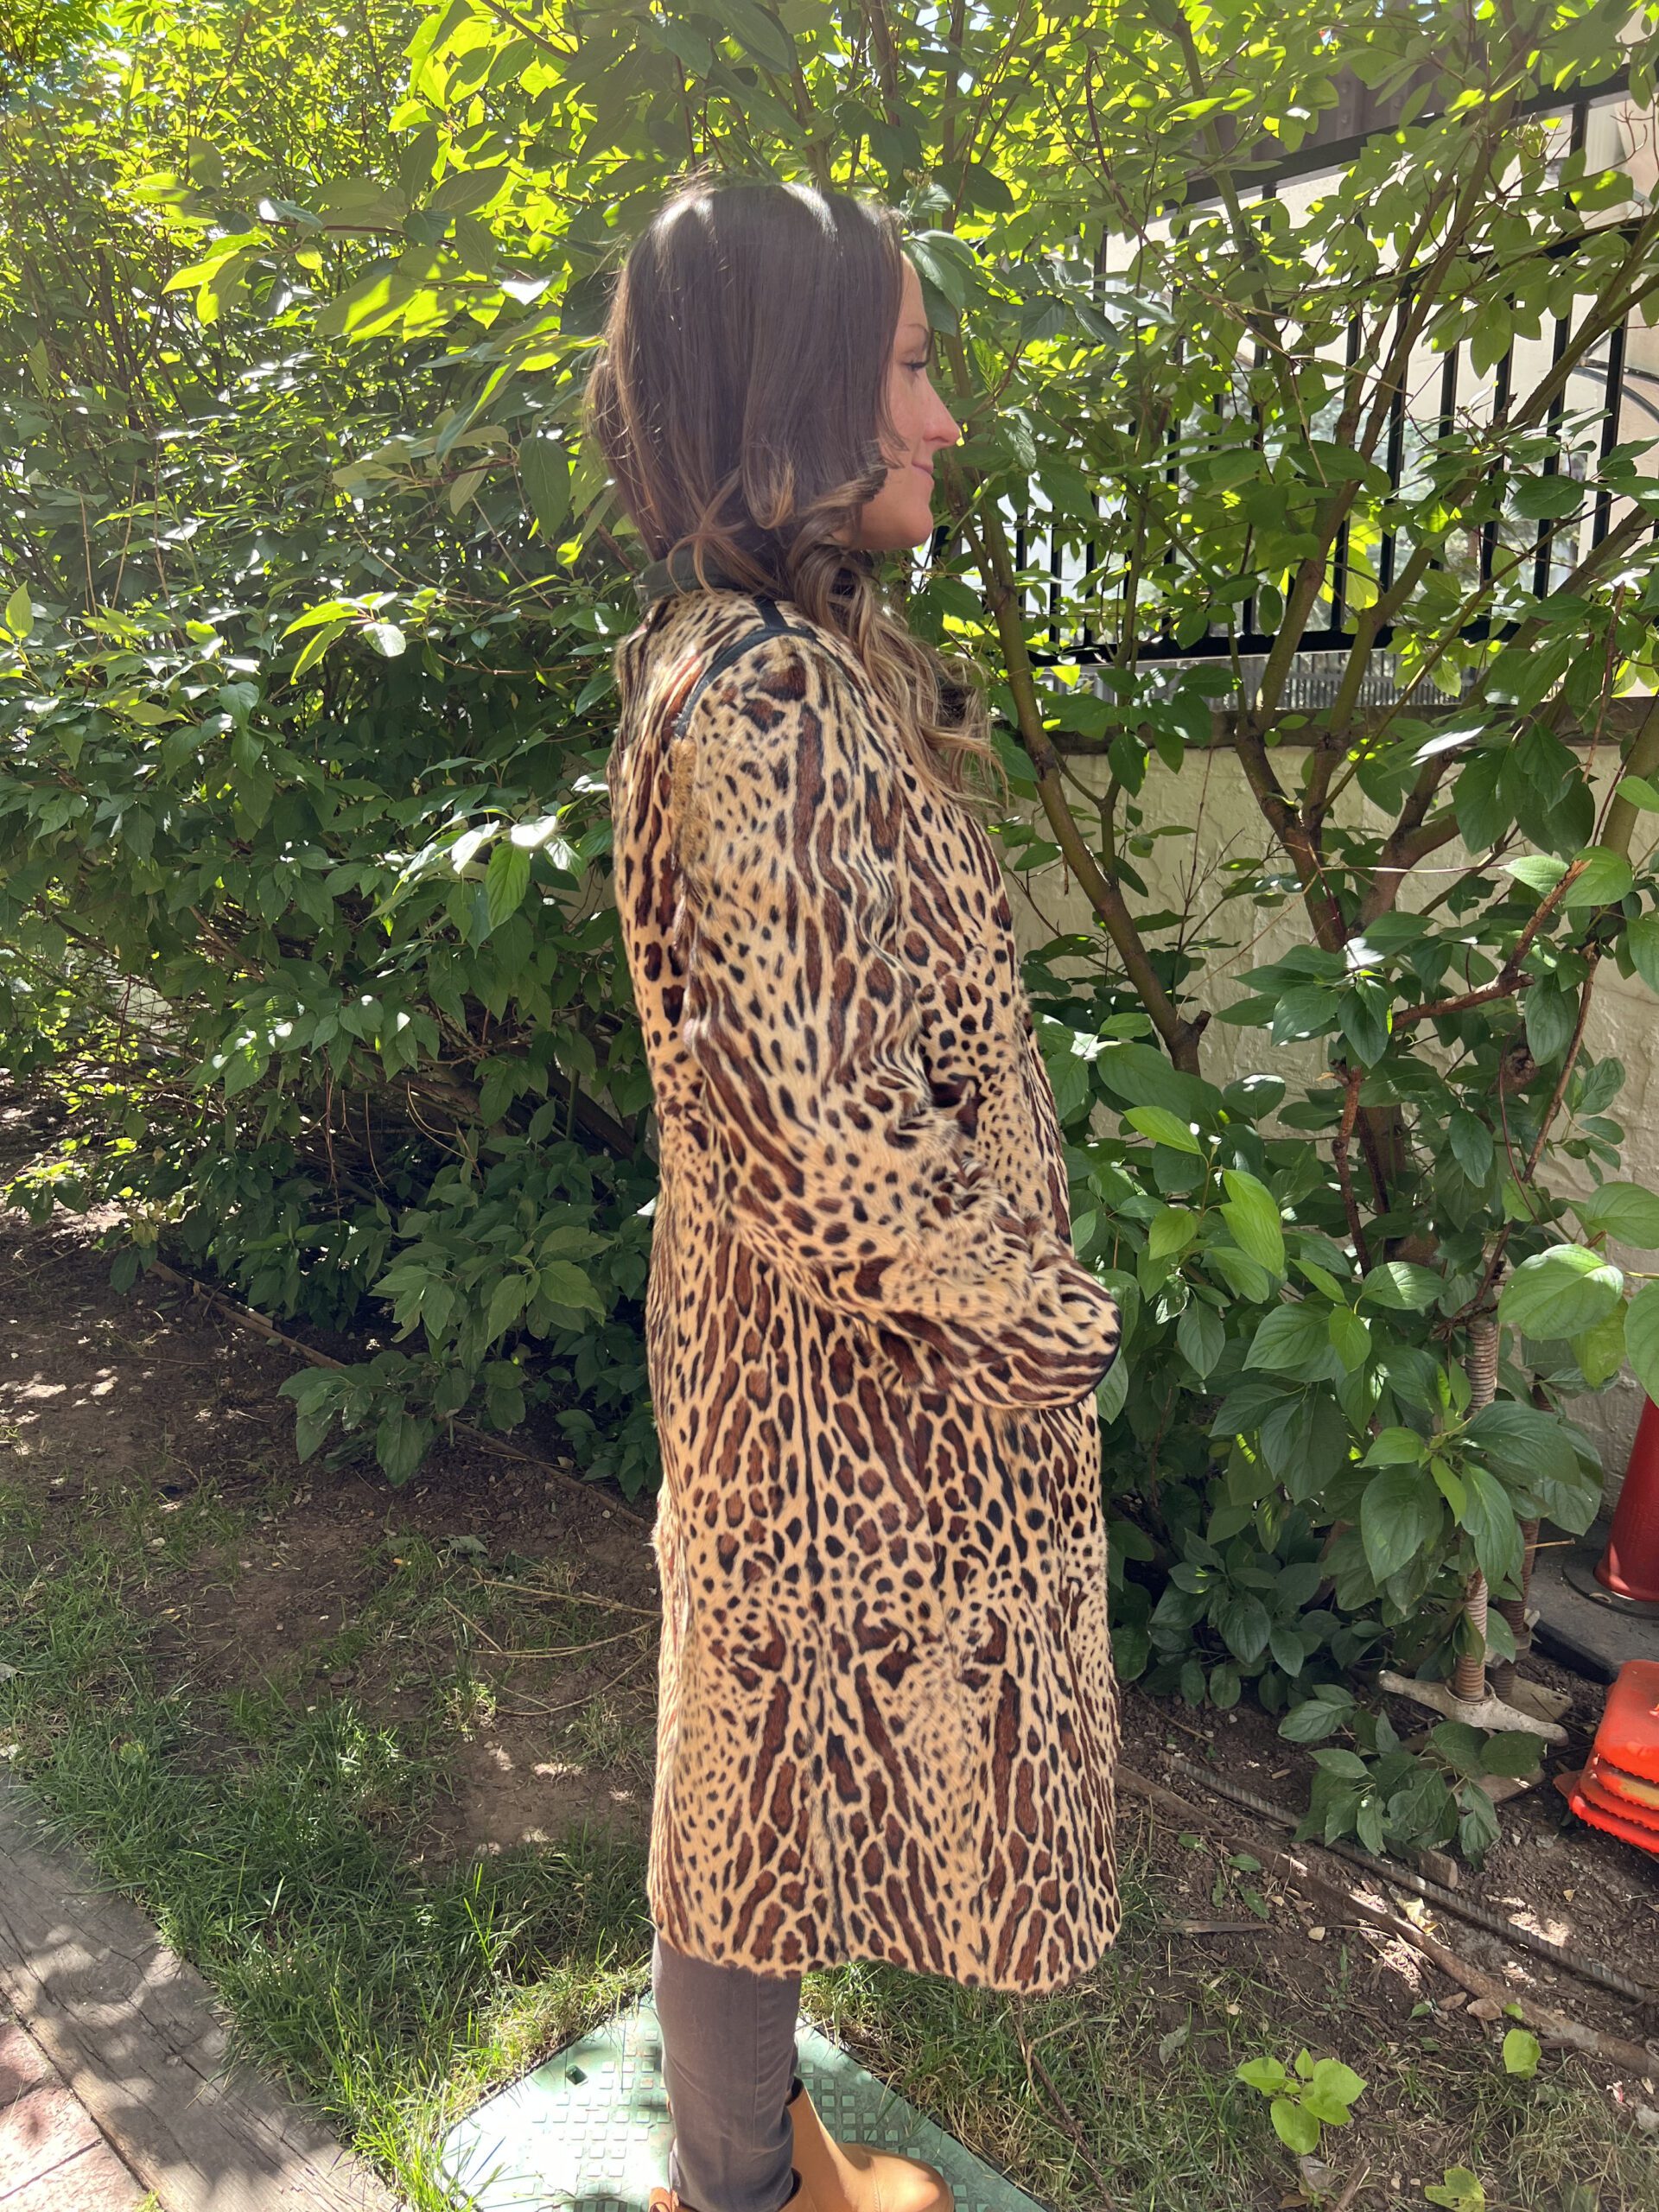 Our dyed animal print goat skin stoller length coat has an eye catching animal print. The stroller length makes it versatile and comfortable. This...